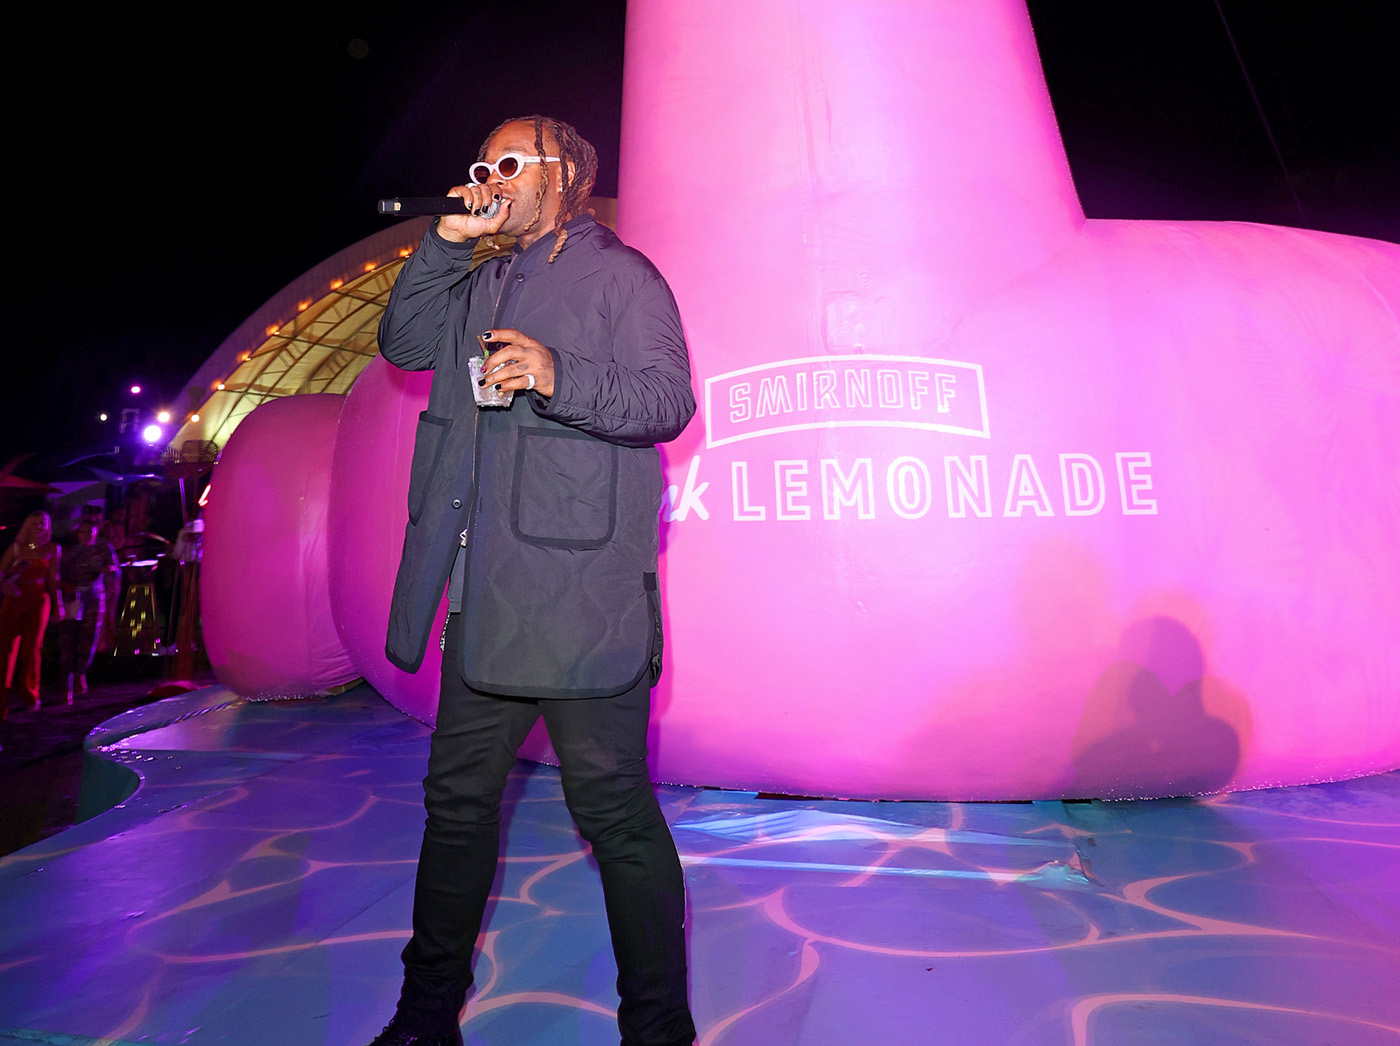 Ty Dolla $ign singing in front of large flamingo.